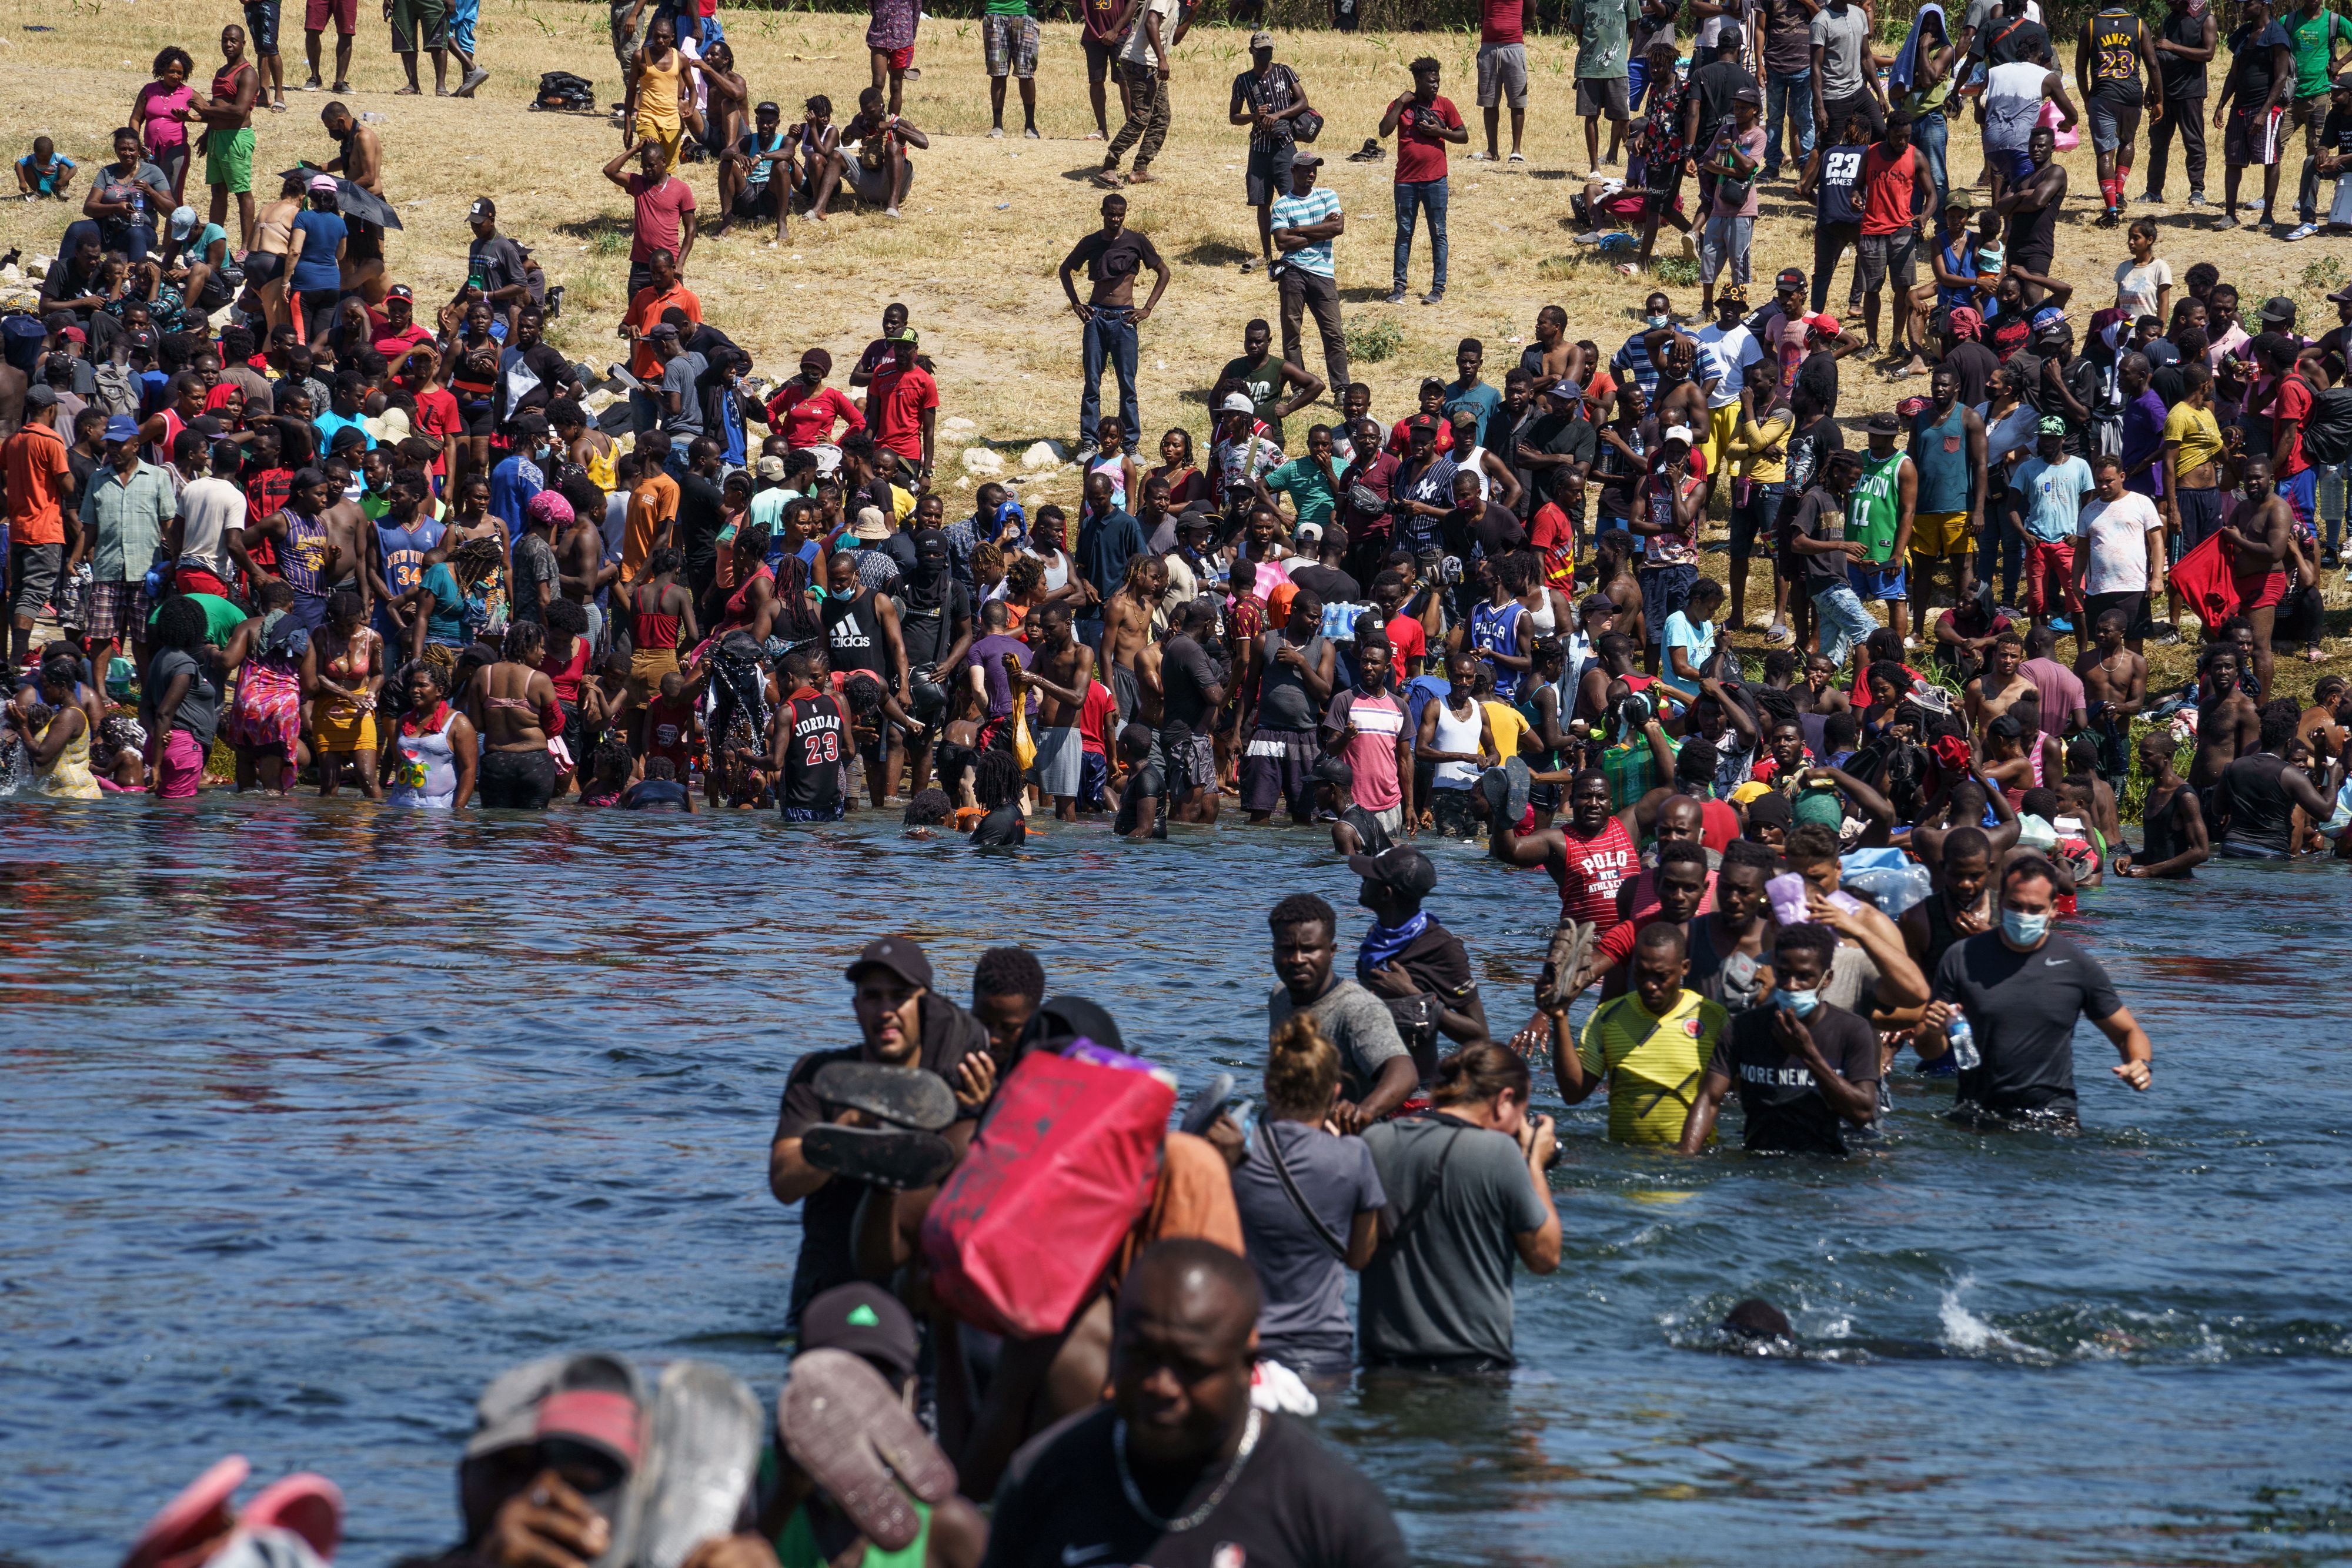 Haitian migrants, part of a group of over 10,000 people staying in an encampment on the US side of the border, cross the Rio Grande river to get food and water in Mexico, after another crossing point was closed near the Acuna Del Rio International Bridge in Del Rio, Texas on September 19, 2021. 